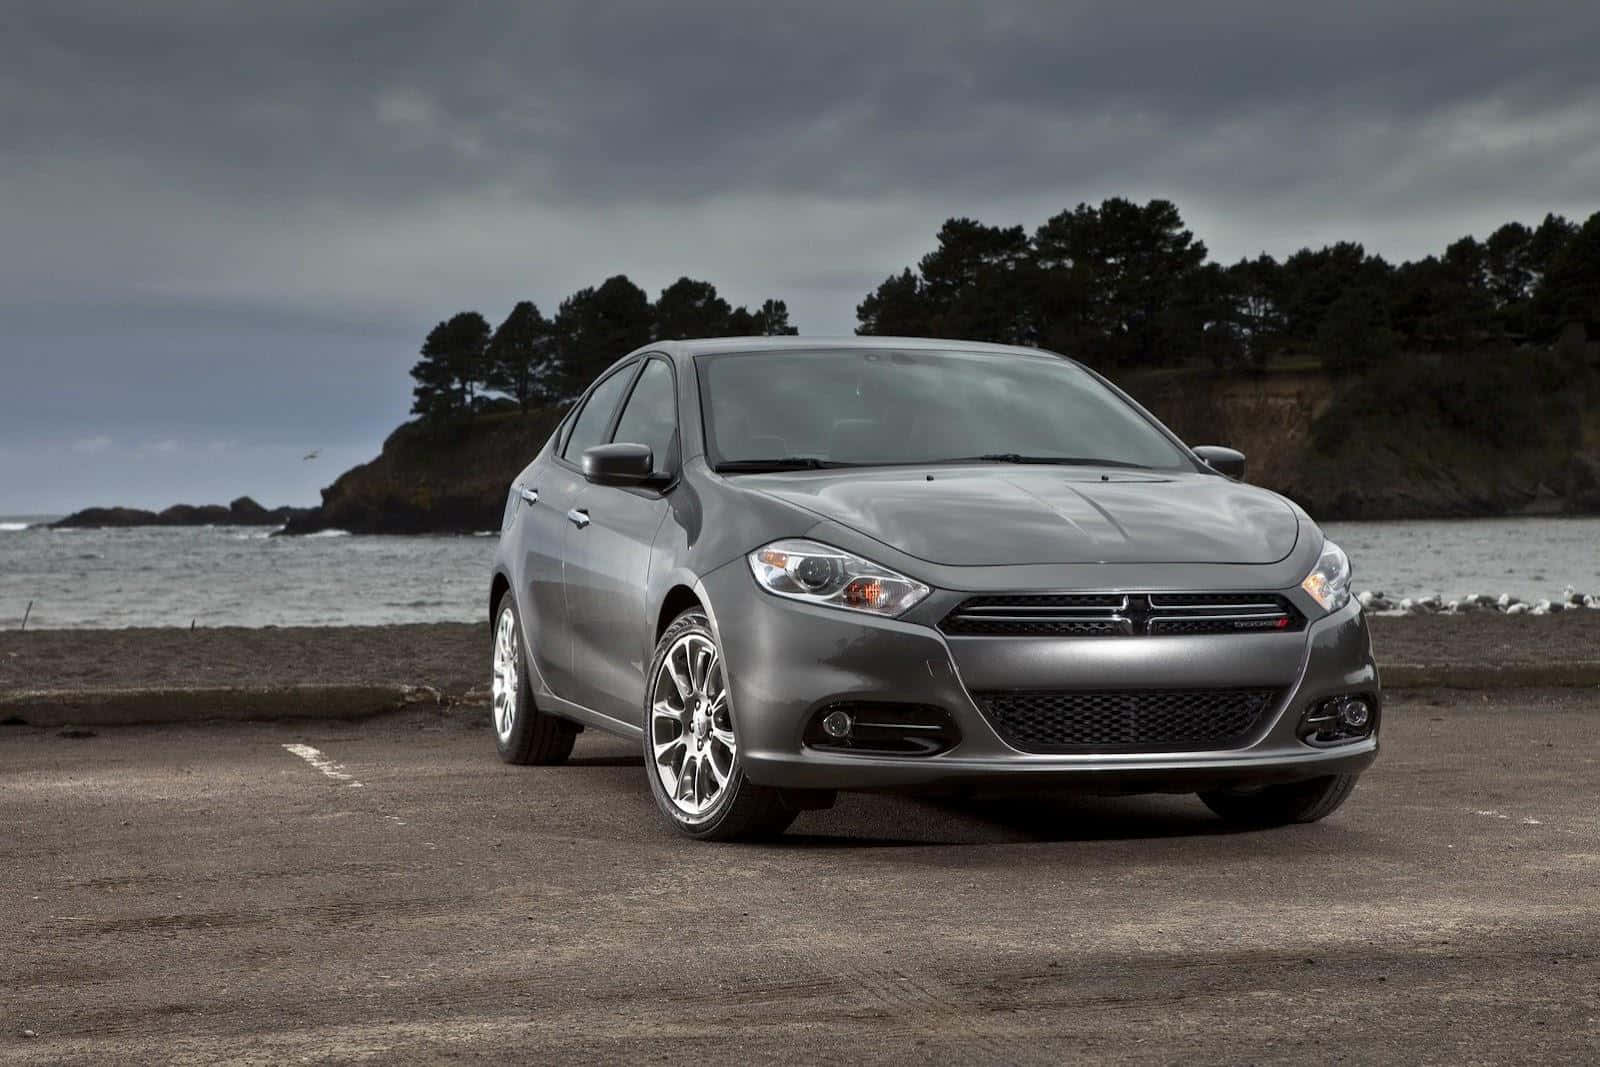 The Powerful Dodge Dart In All Its Glory Wallpaper